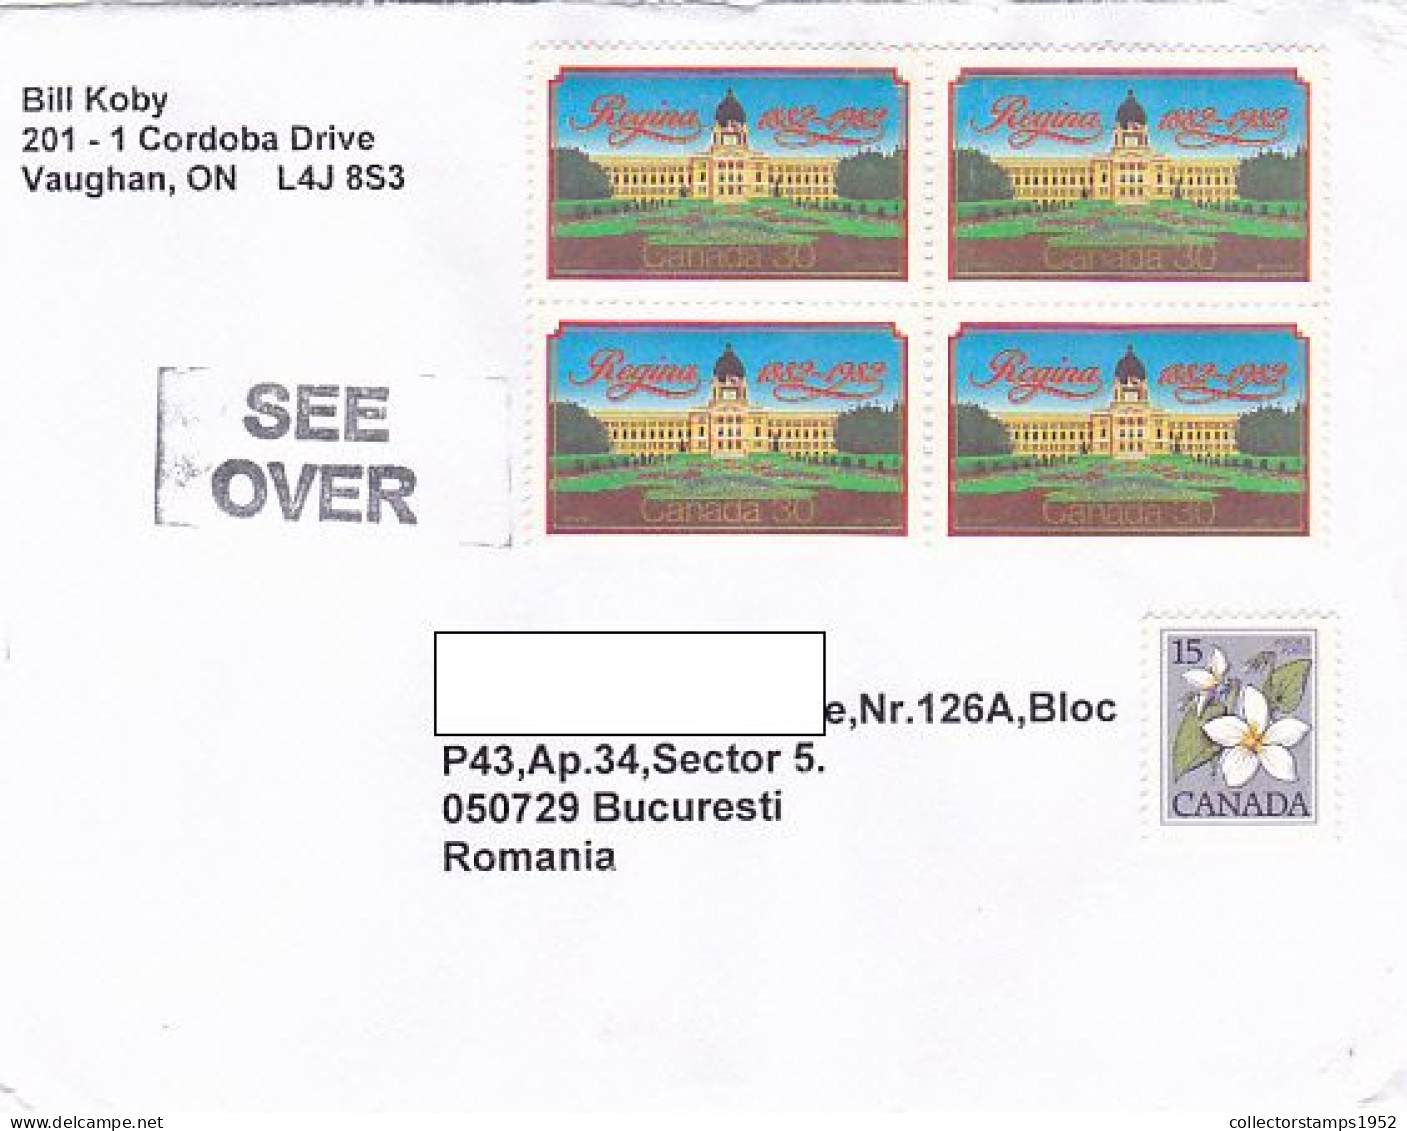 REGINA LEGISLATURE BUILDING, PLANE, MUSIC, CHRISTMAS, TOY HORSE, FINE STAMPS ON COVER, 2021, CANADA - Covers & Documents